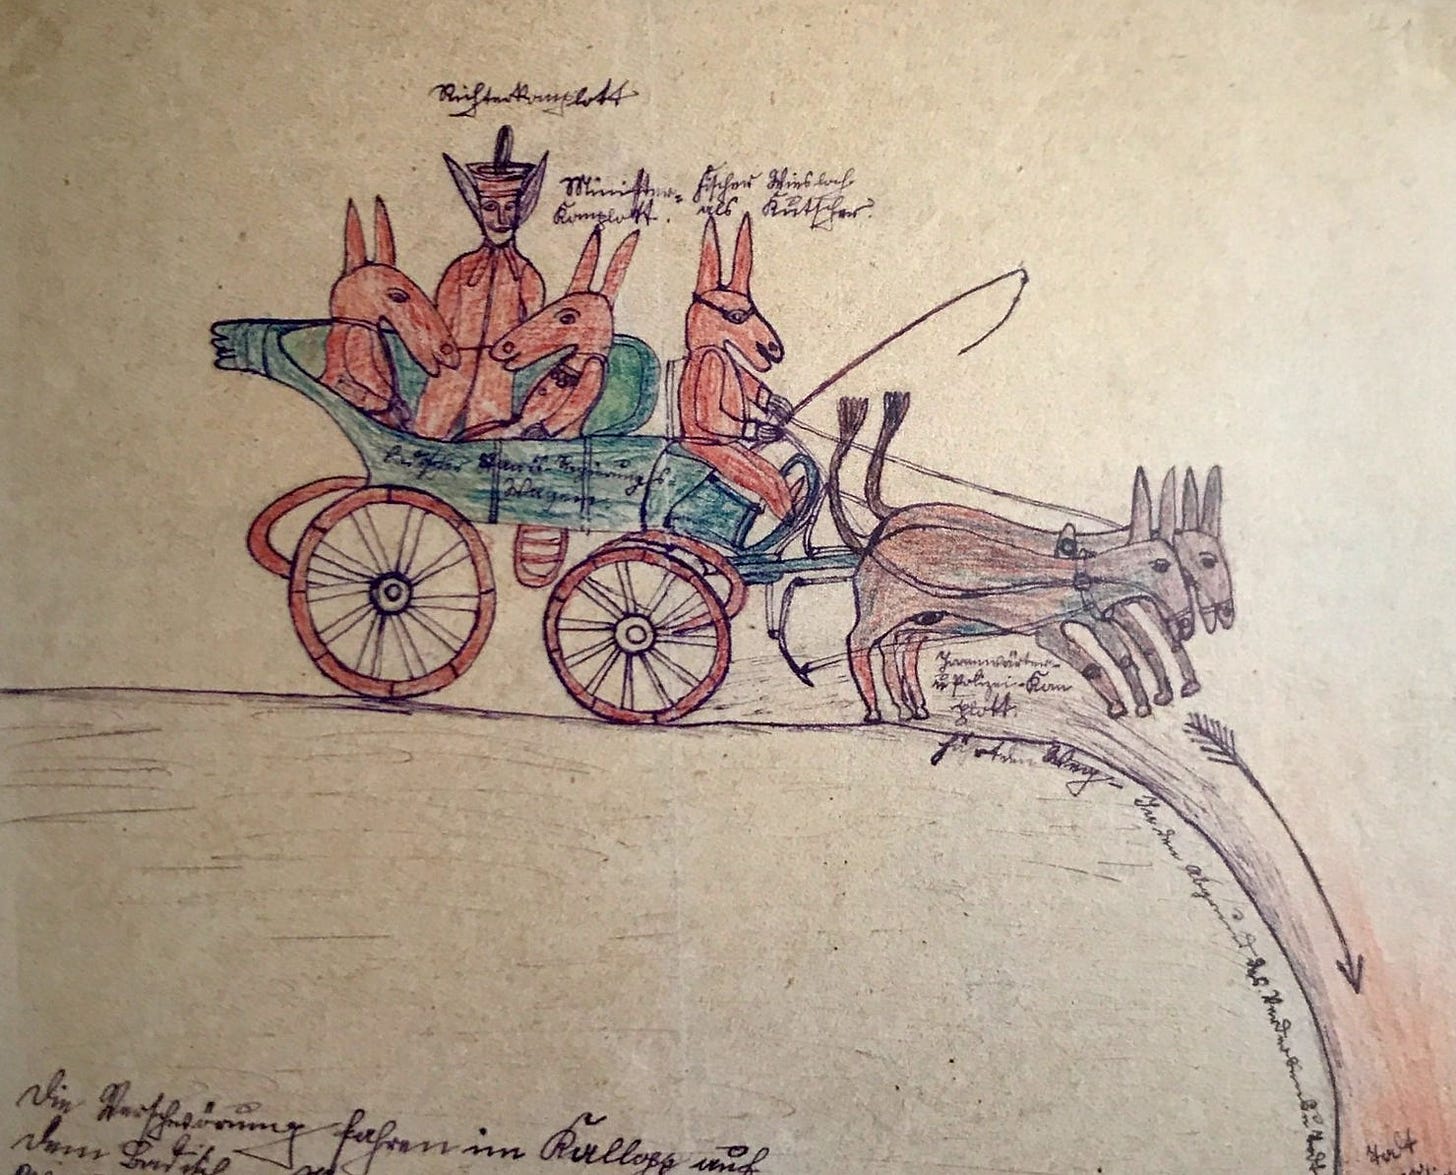 Four humanoid figures with animal heads (donkeys or maybe rabbits) ride a horse-drawn carriage over a cliff. There are words (transcribed in the caption) surrounding them.